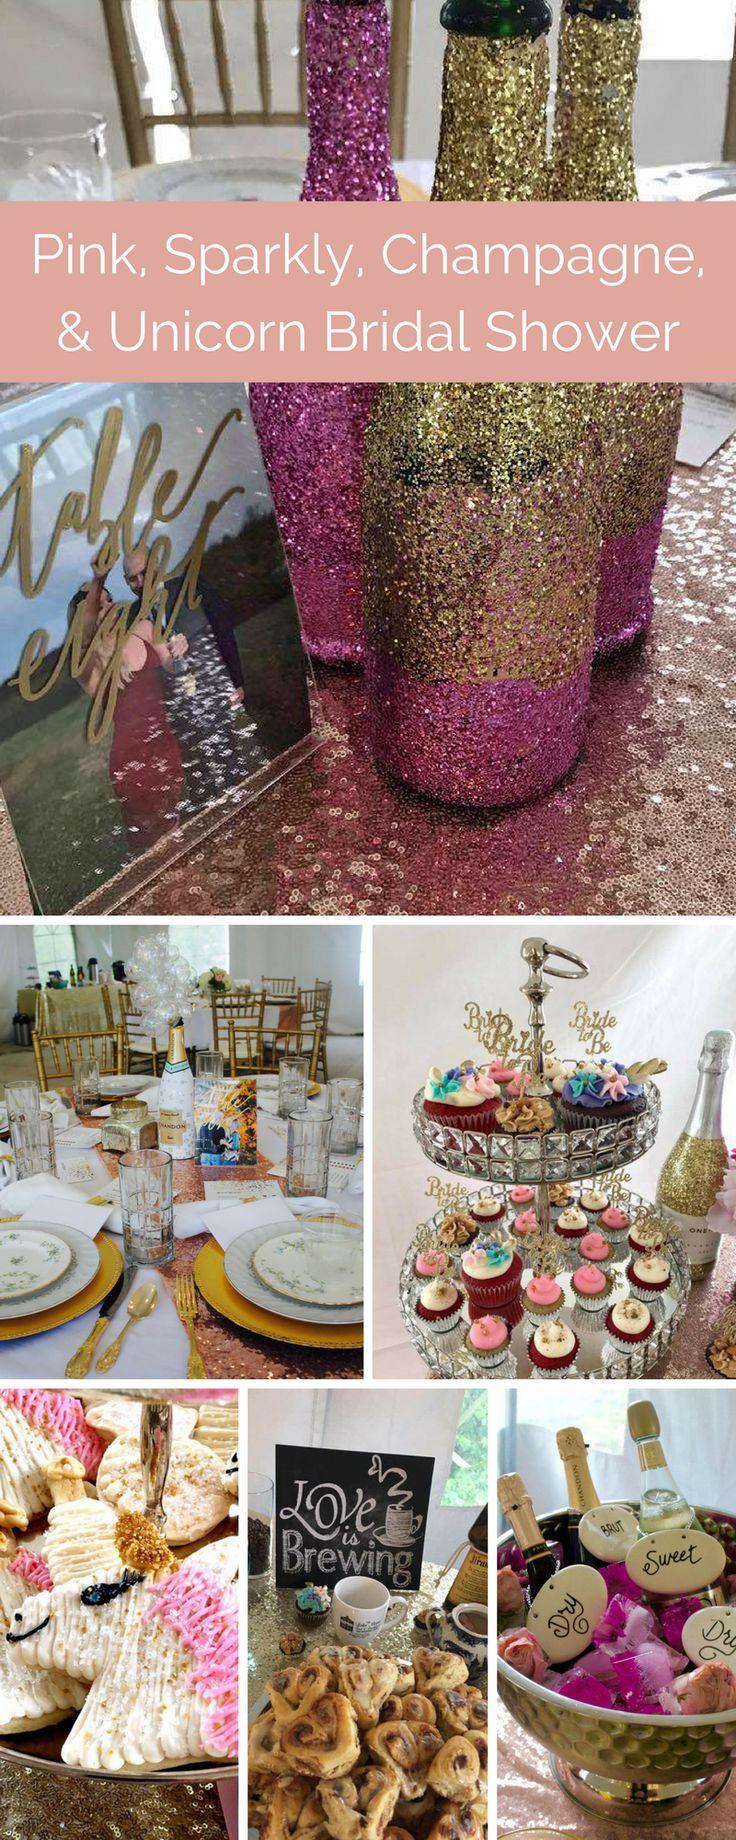 Wedding - This Bridal Shower Is Made Of Sparkly Champagne Dreams